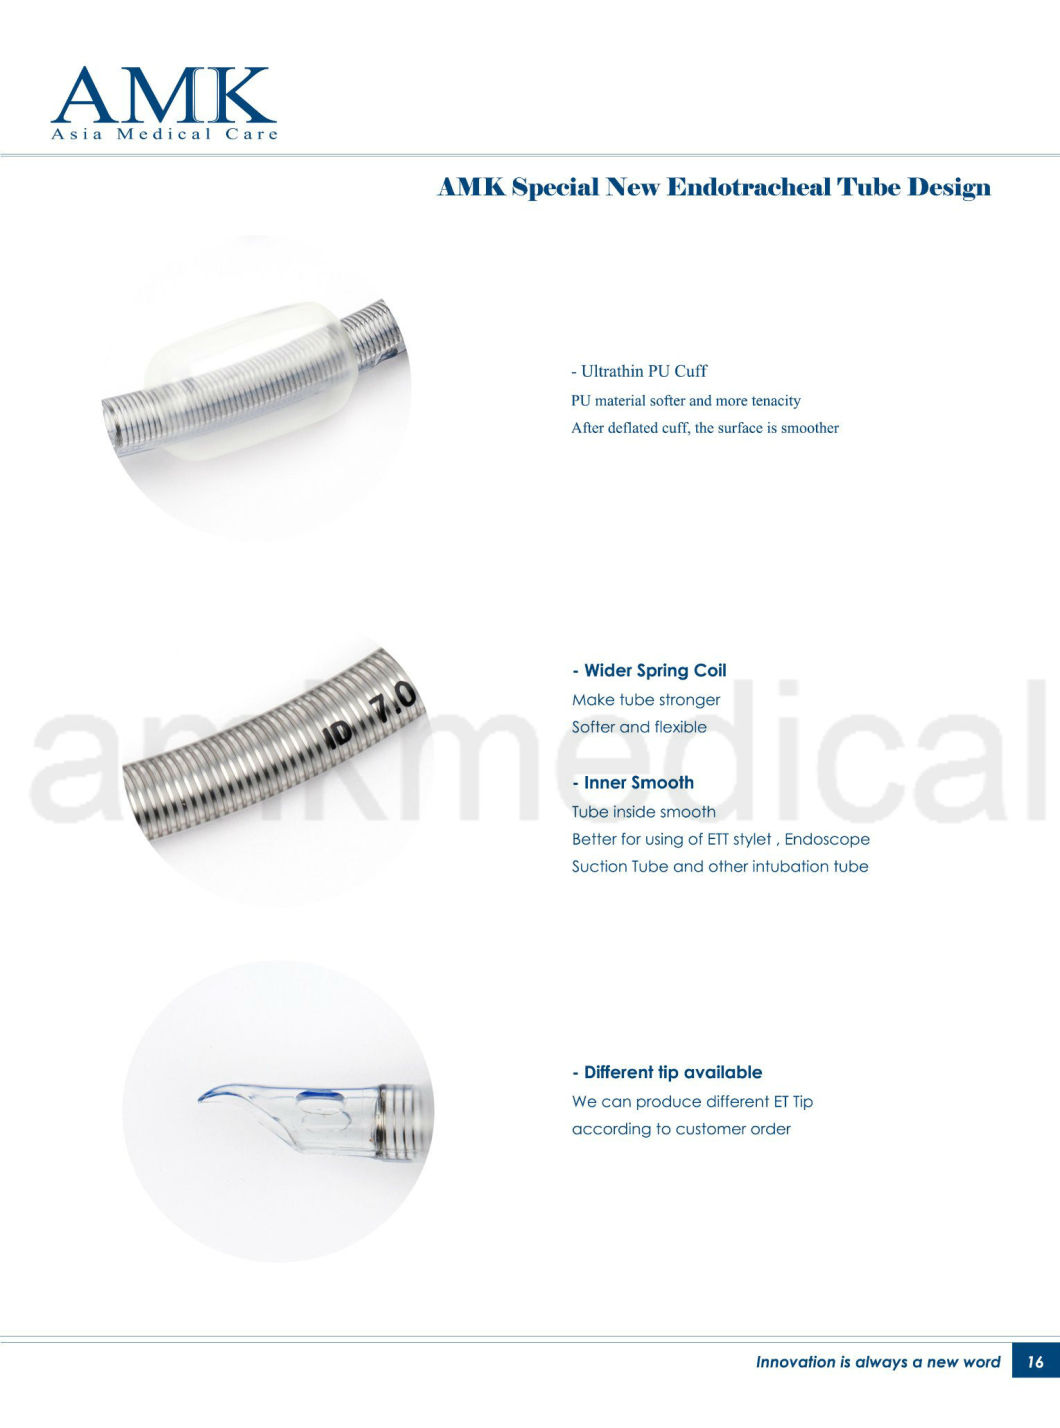 Disposable Medical Reinforced Endotracheal Tube with Suction Port- Ultrathin PU Cuff